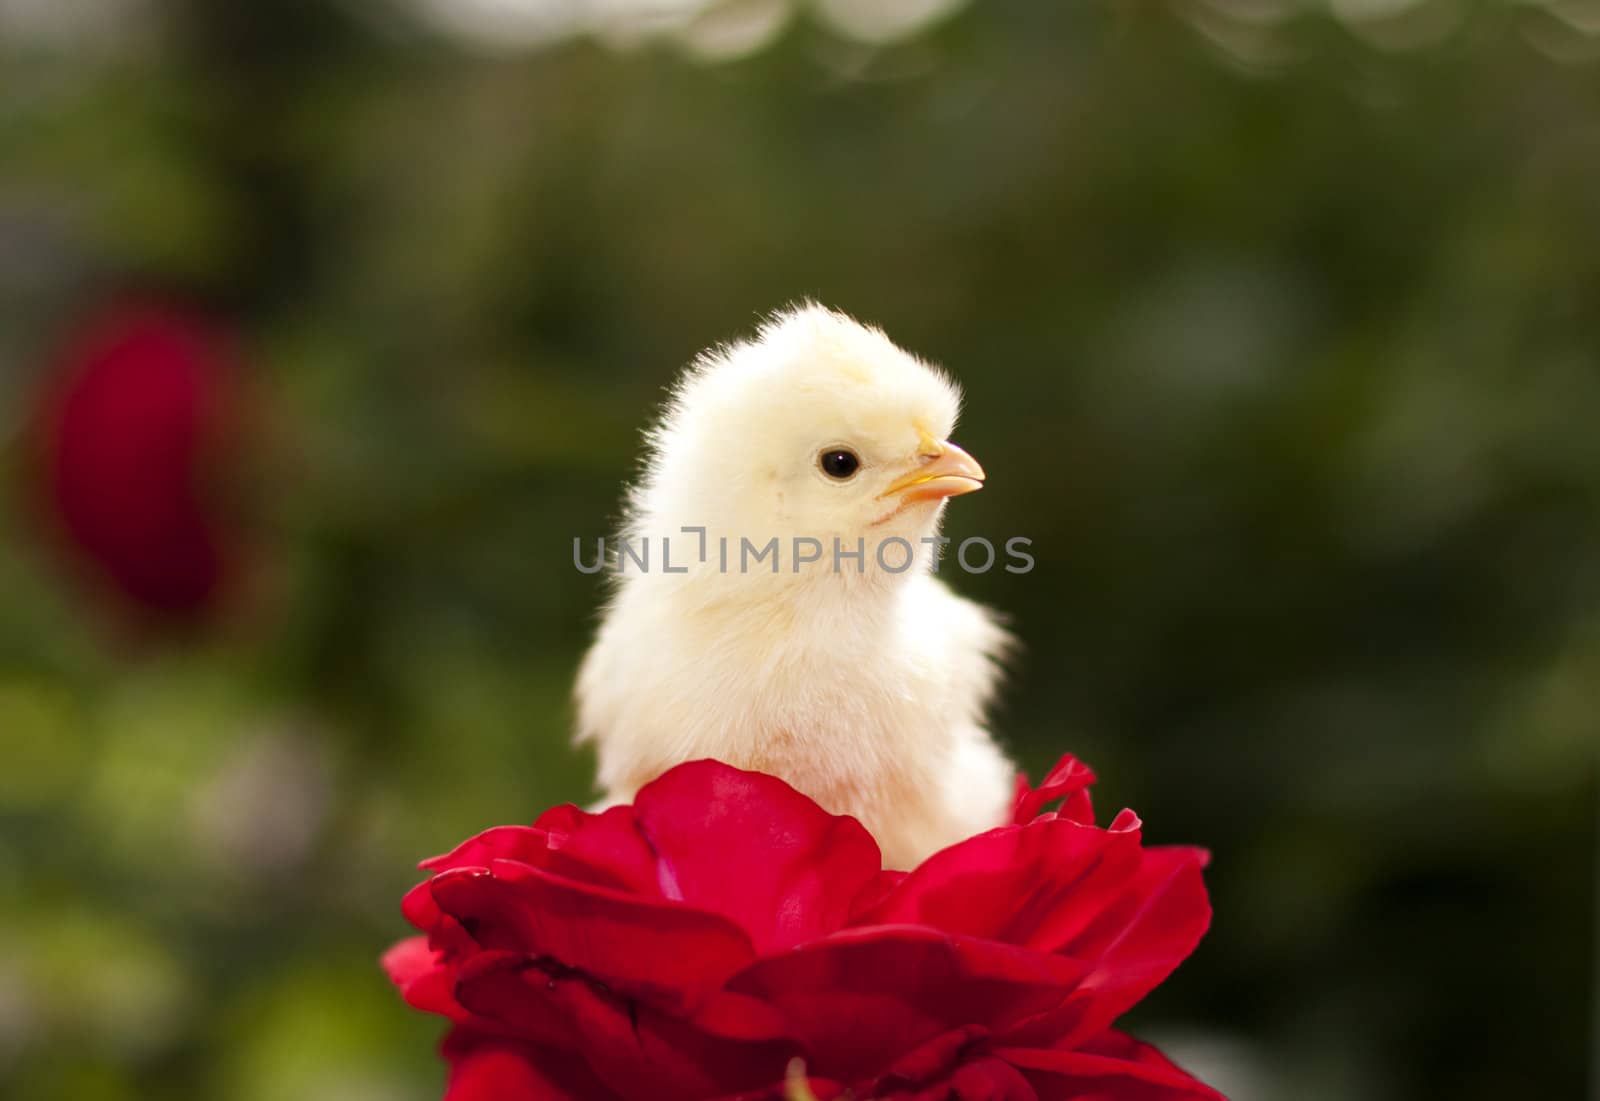 Chicken little is on the red roses